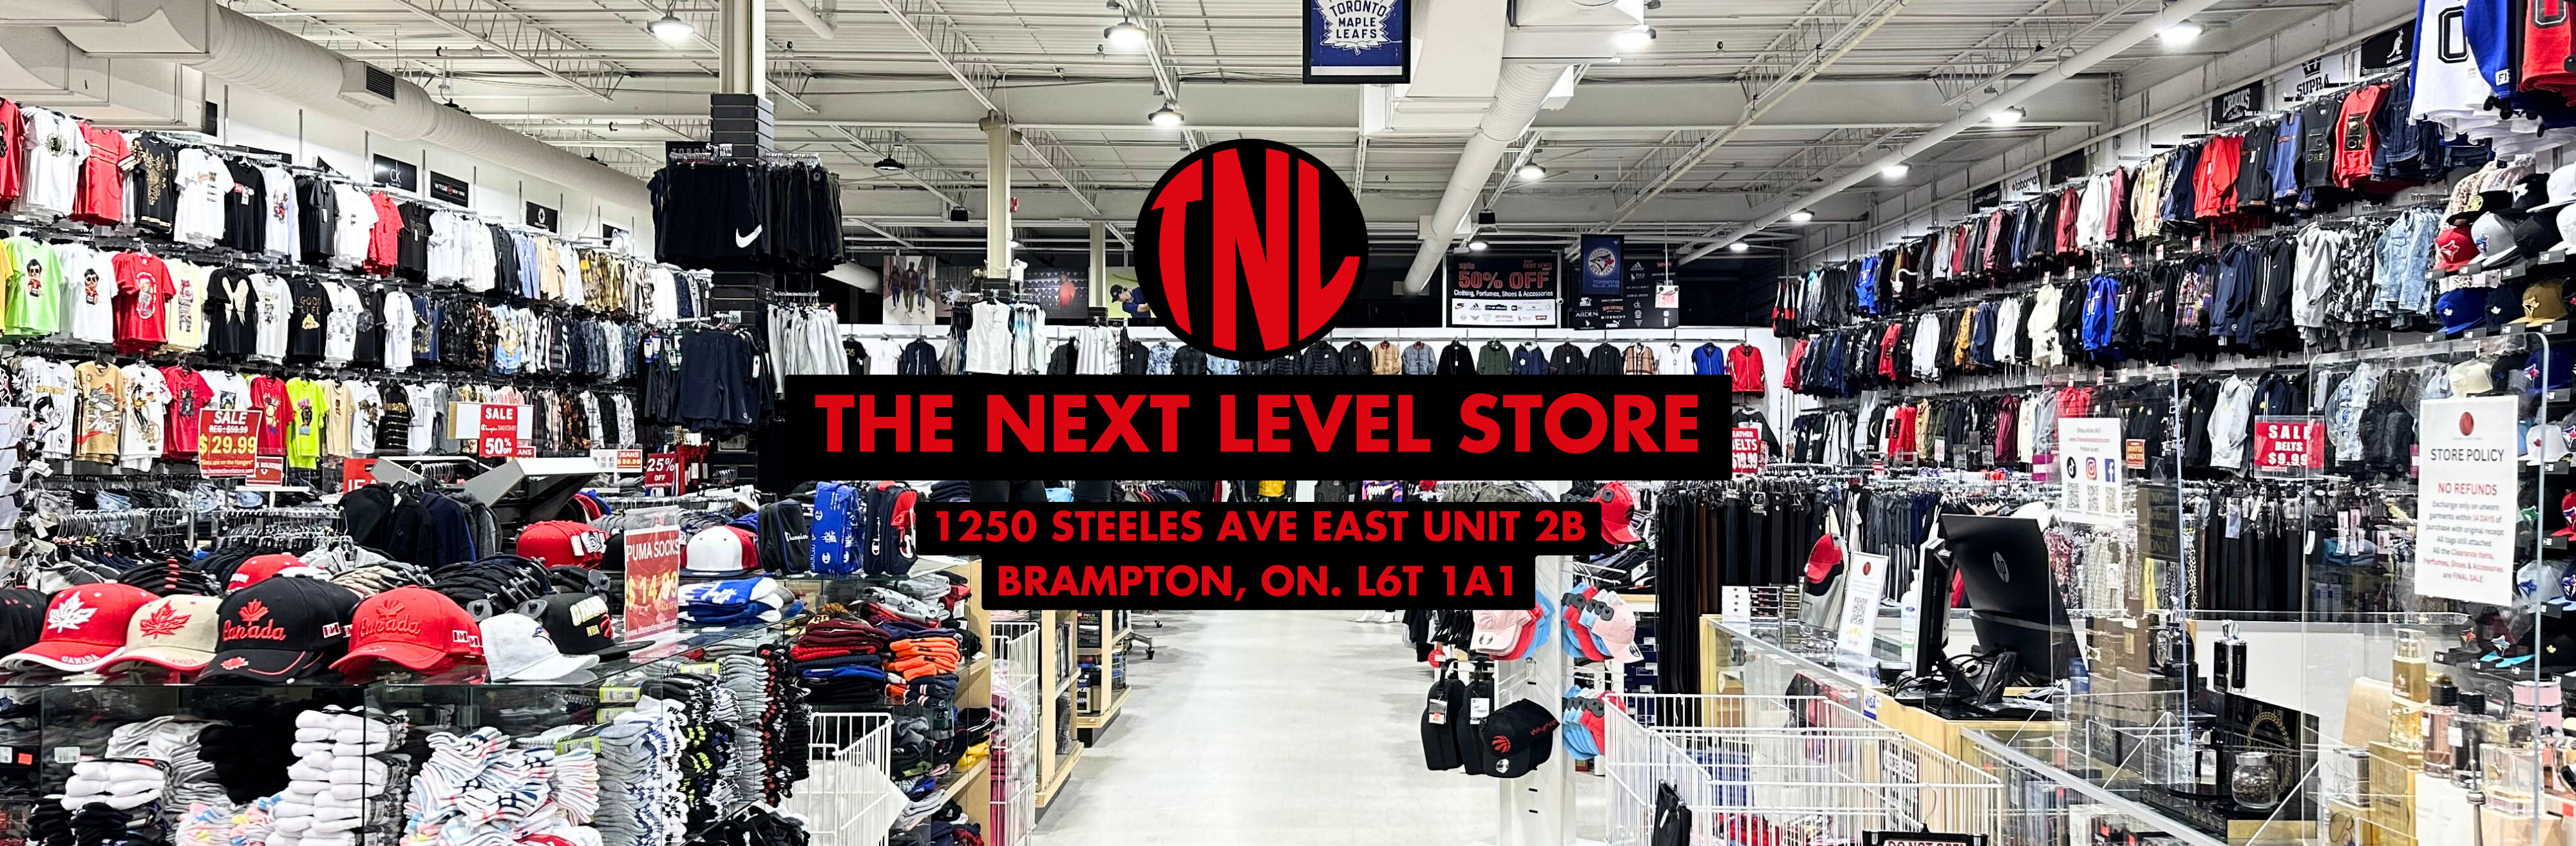 THE NEXT LEVEL STORE